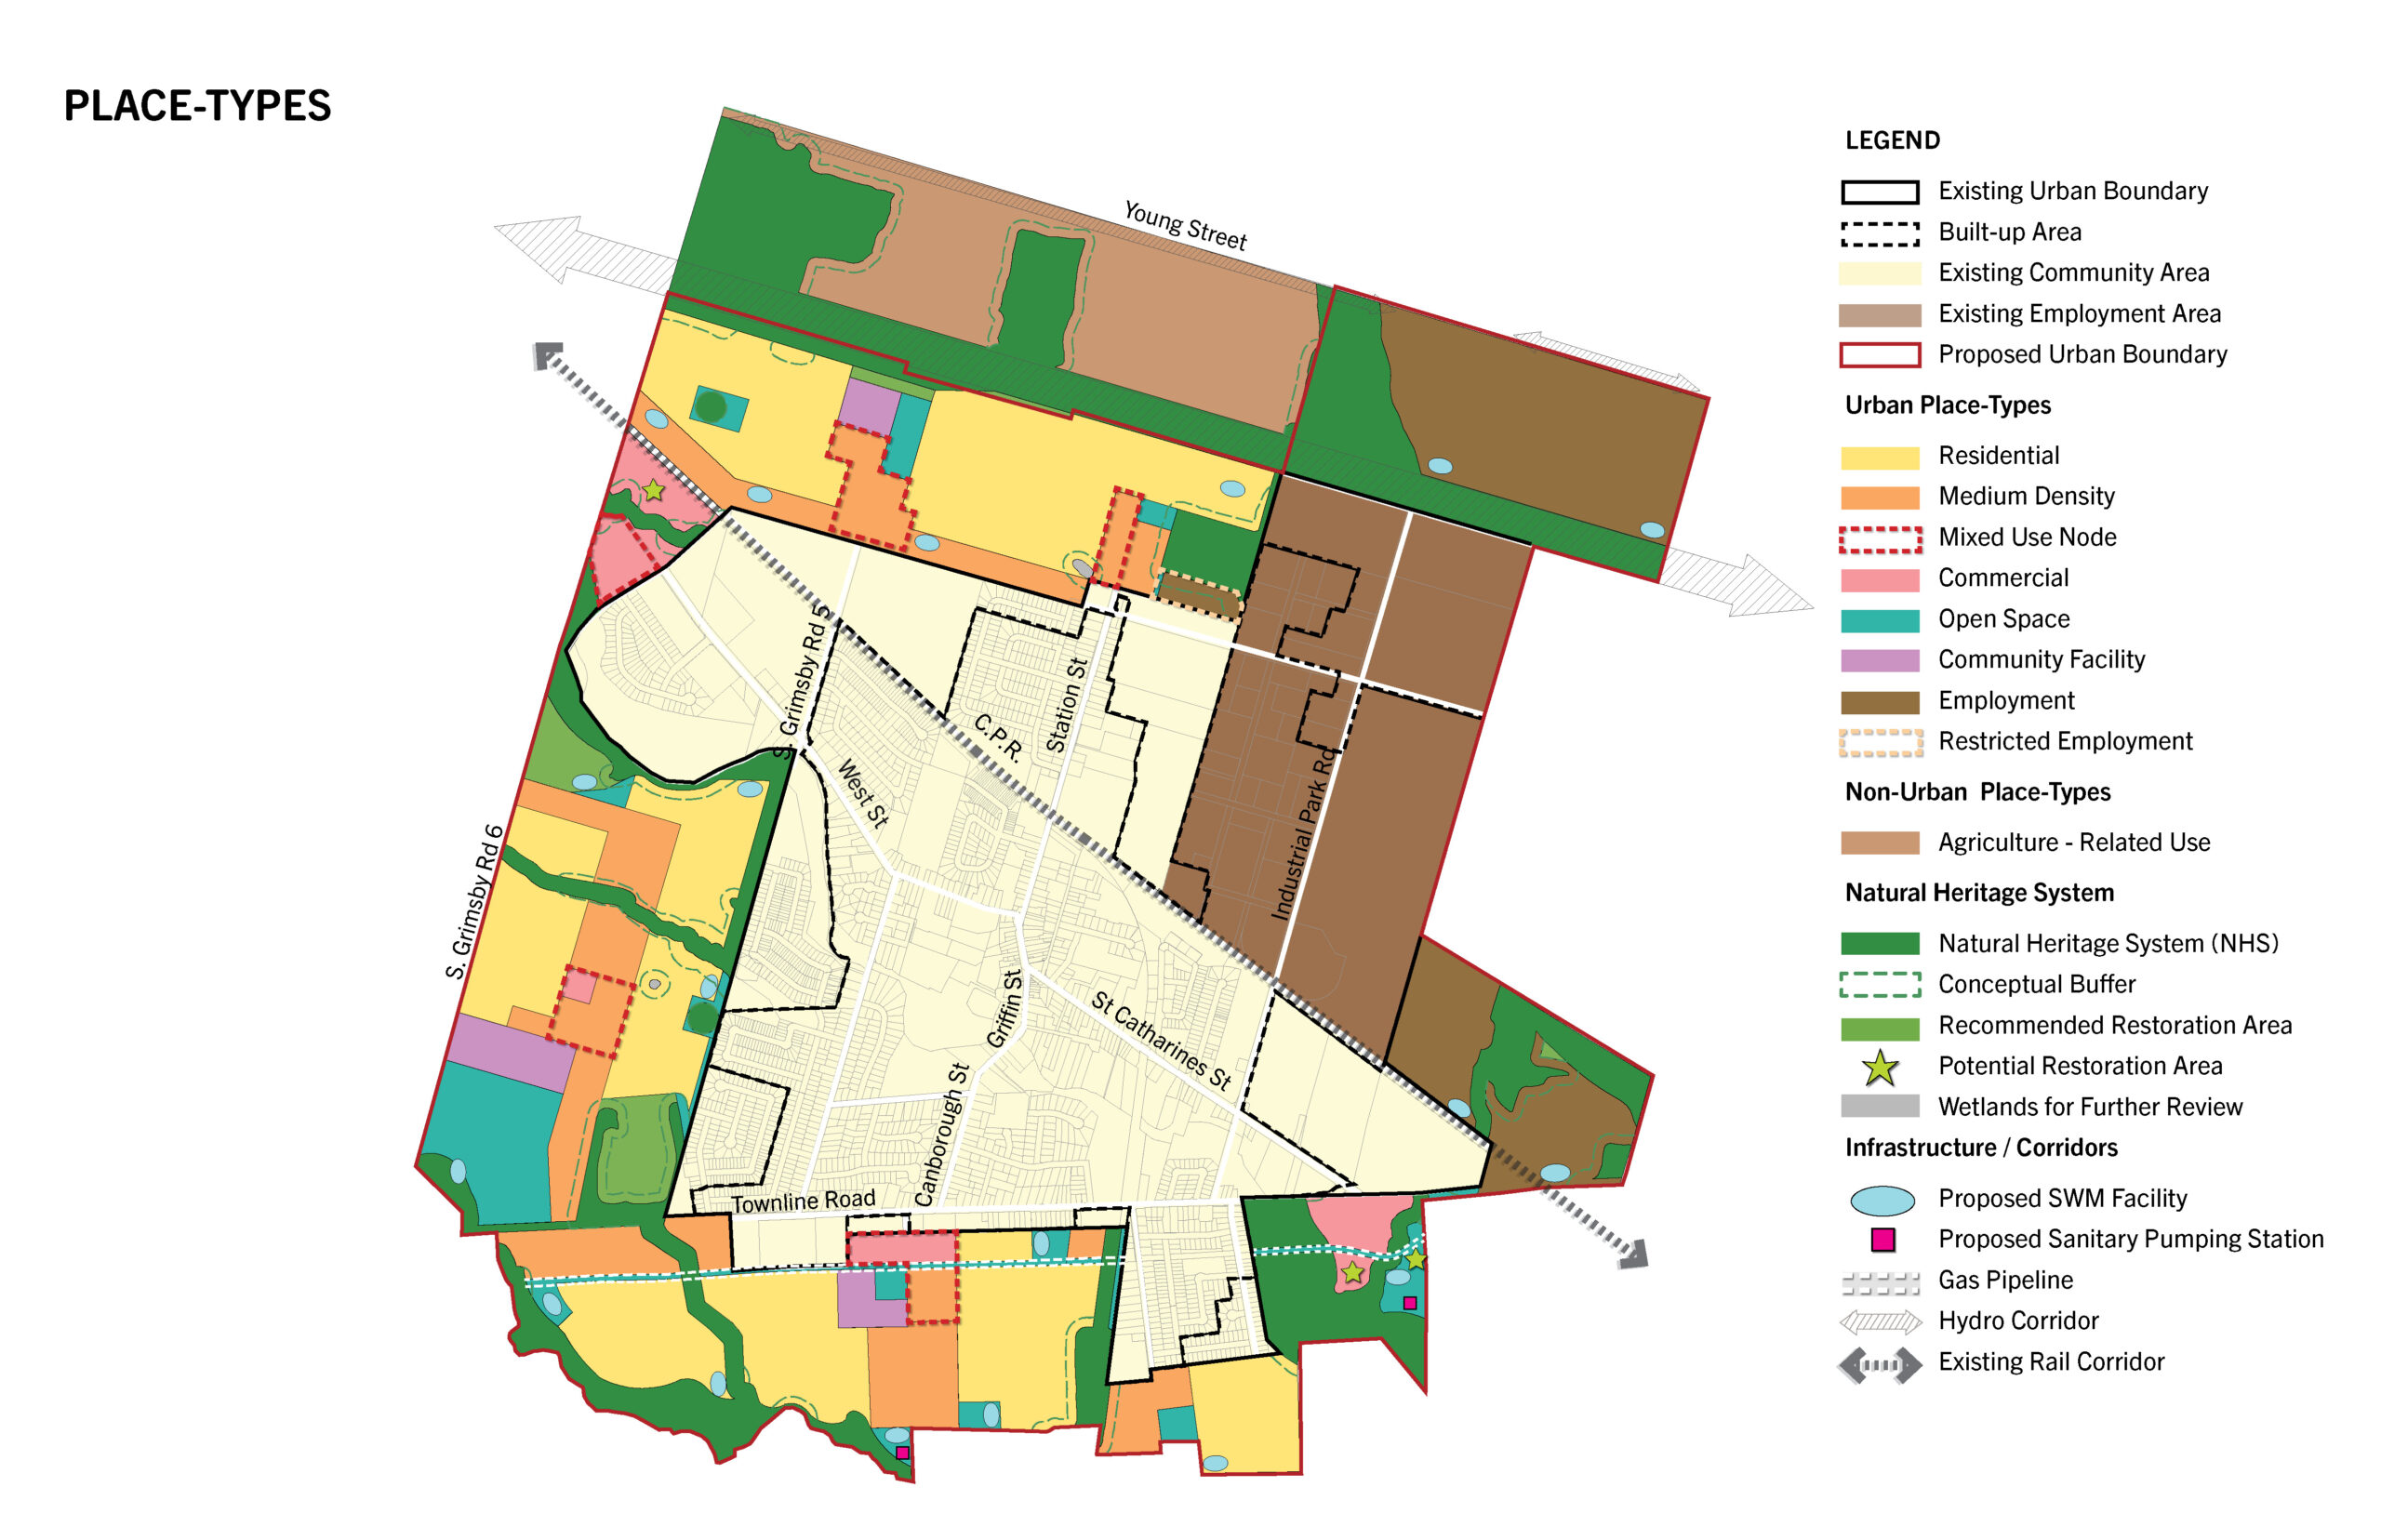 This plan shows the proposed land uses or place-types for the urban expansion area.